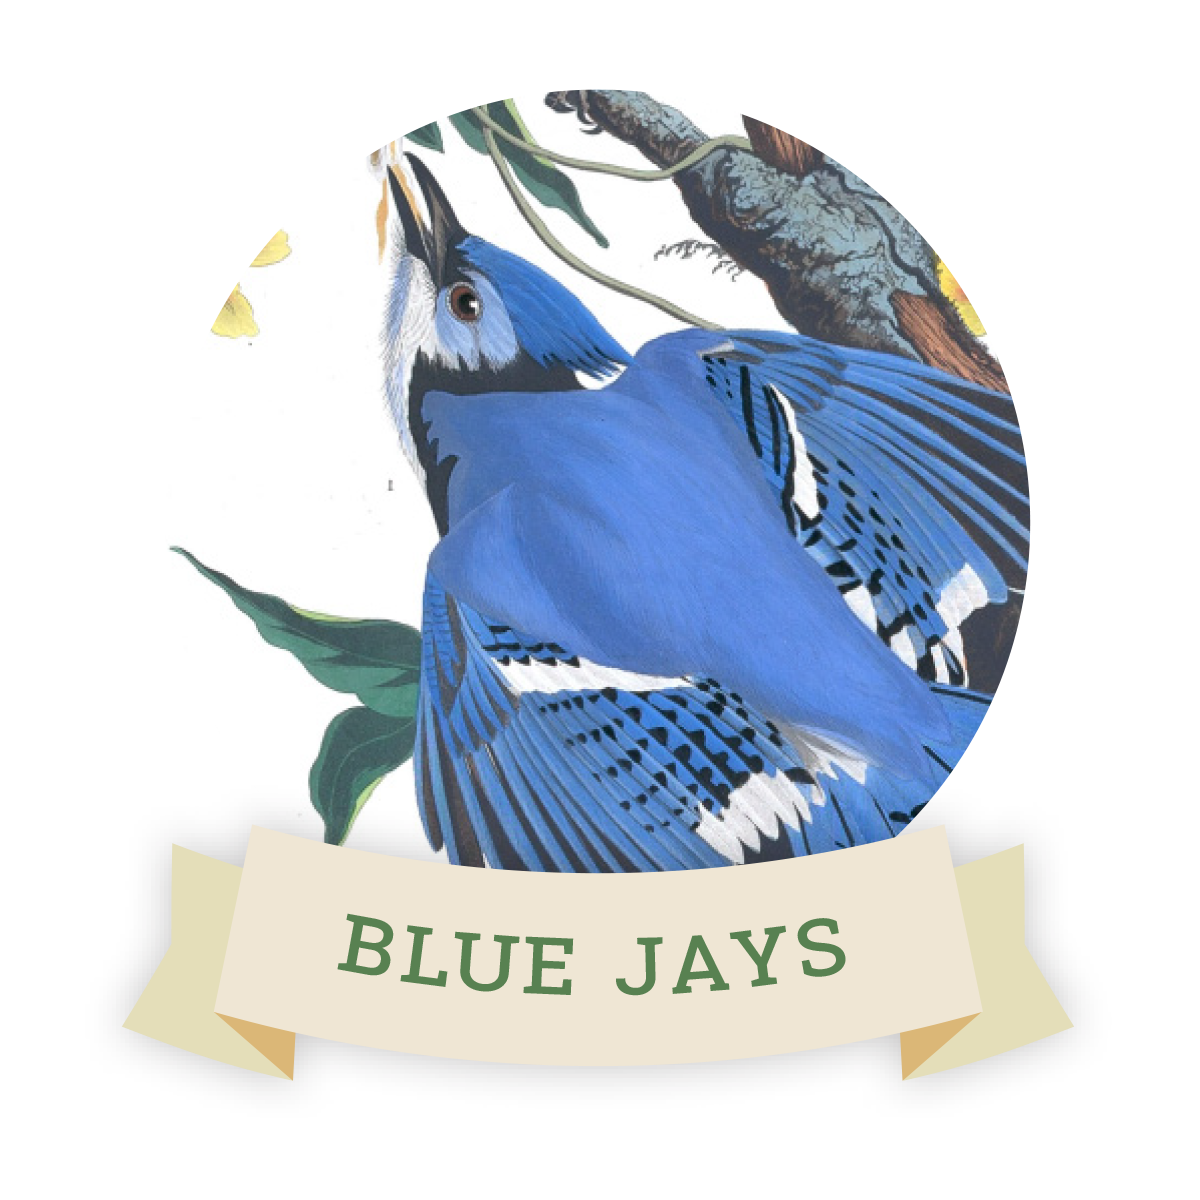 Image of a blue jay. Links to blue jay favorite food and feeders.